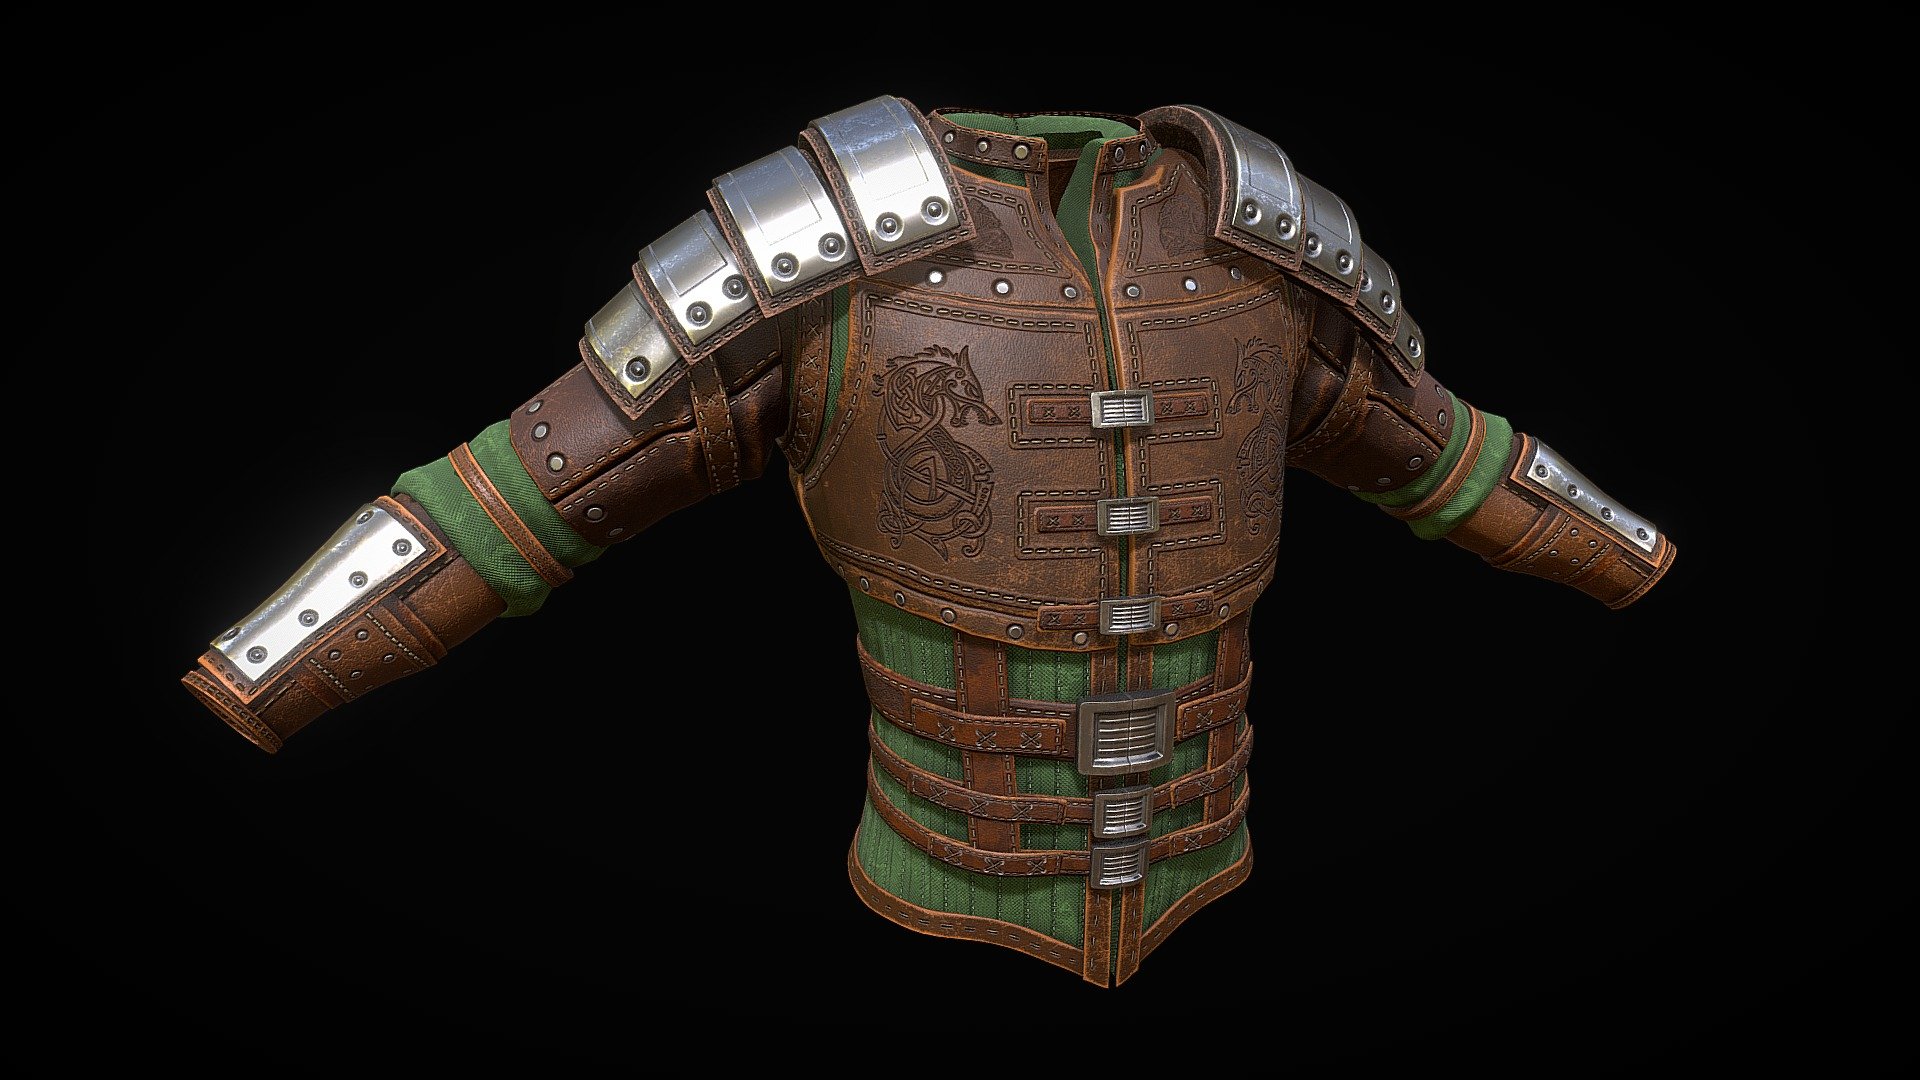 Low-poly 3D model of light leather armor, this model doesn't contain any ngons and has an optimal topology, includes 4K PBR textures - Light Leather Armor - 3D model by CGnewbie 3d model